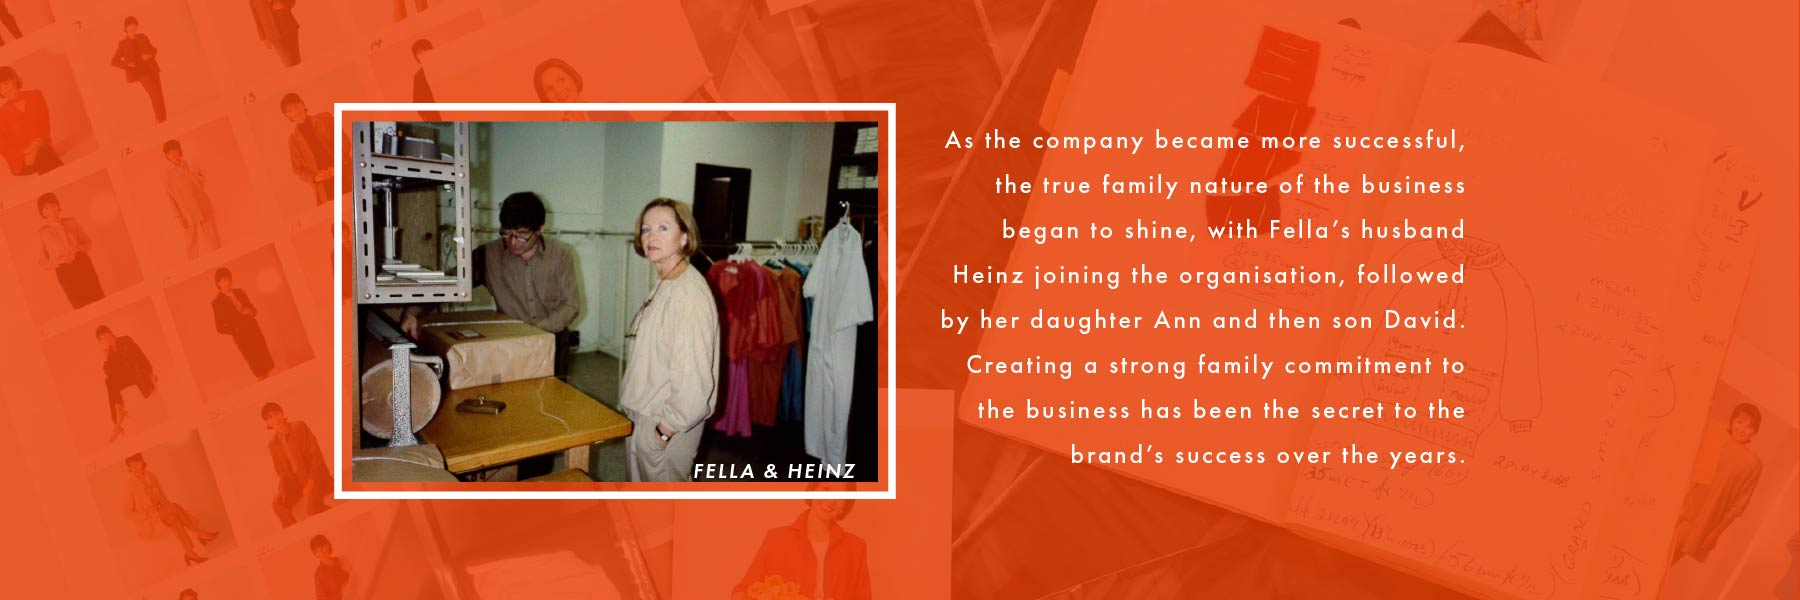 As the company became more successful, Fella's husband joined, followed by her daughter Ann and then son David.